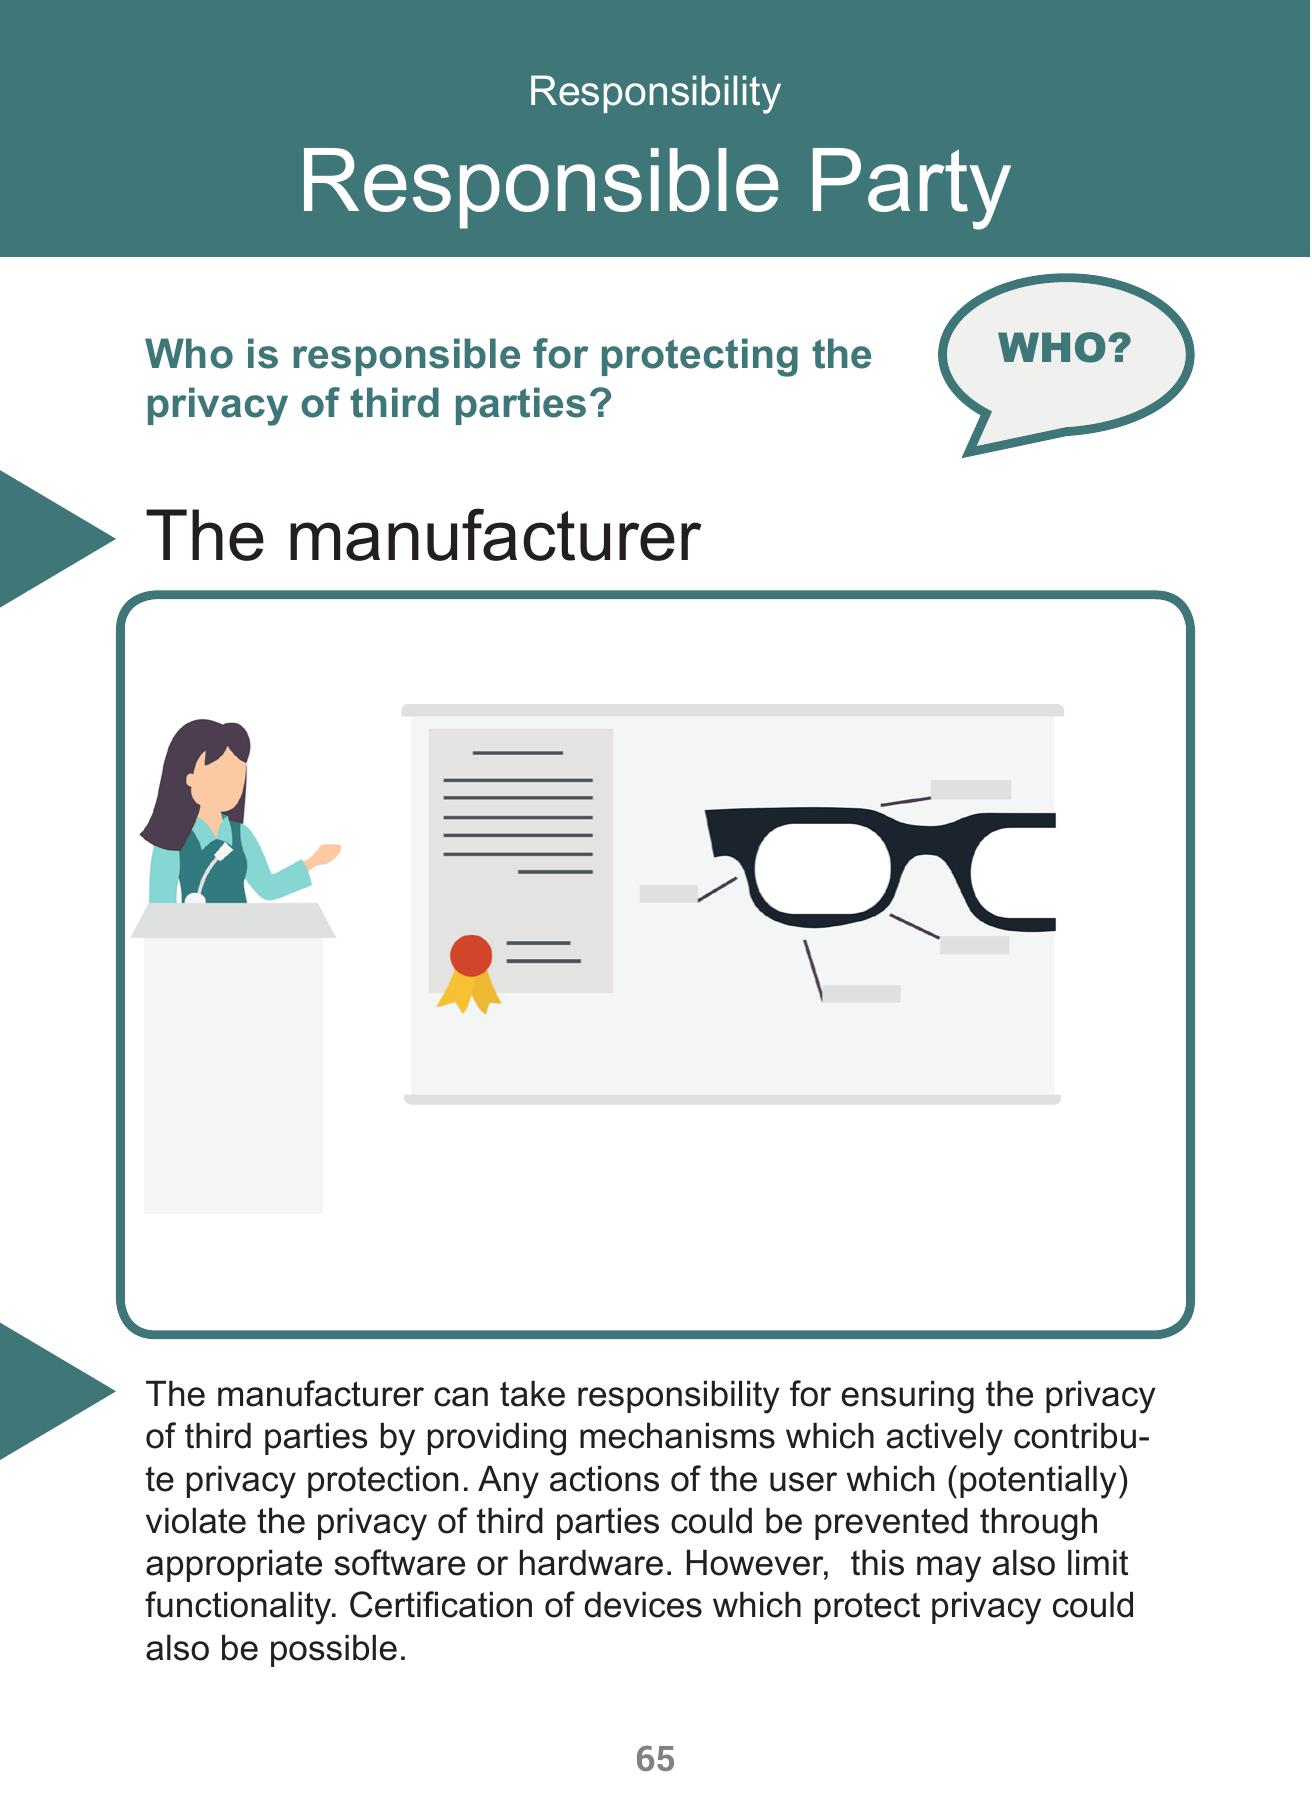 The image shows the front of a card. At the top there is a header with a dark blue background, the rest of the card has a white background The header has the word Responsibility in small letters and the word Responsible Party in bigger letters in it. Below the header are the words Who is responsible for protecting the privacy of third parties?, to the right of it is a speech bubble with the word WHO? in it. Below that is a heading that says The manufacturer, to the left of it is a dark blue triangle. Below that is an image with a dark blue border with rounded corners. A person is holding a presentation. On the slide there is a diagram of glasses, to the left of it is a document with lines representing text and a red dot with ribbons at the bottom. Below that is a paragraph with a dark blue triangle to the left of it. The paragraph reads The manufacturer can take responsibility for ensuring the privacy of third parties by providing mechanisms which actively contribute privacy protection. Any actions of the user which (potentially) violate the privacy of third parties could be prevented through appropriate software or hardware. However, this may also limit functionality. Certification of devices which protect privacy could also be possible.